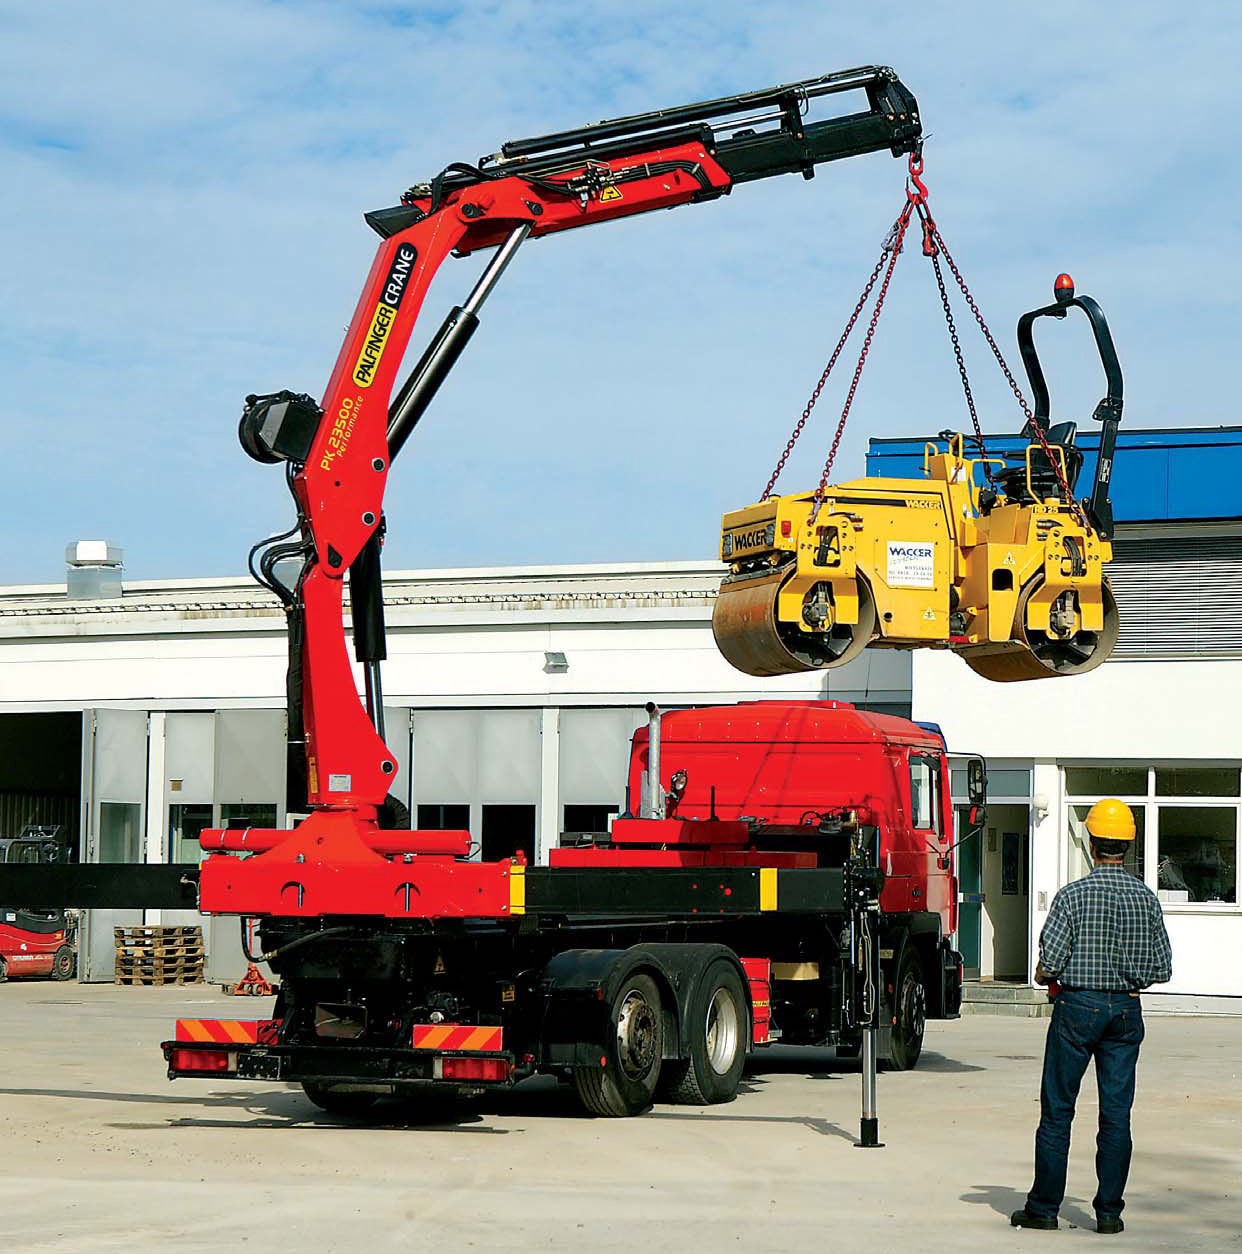 Sample of industrial vehicle loading crane over 10 tonnes